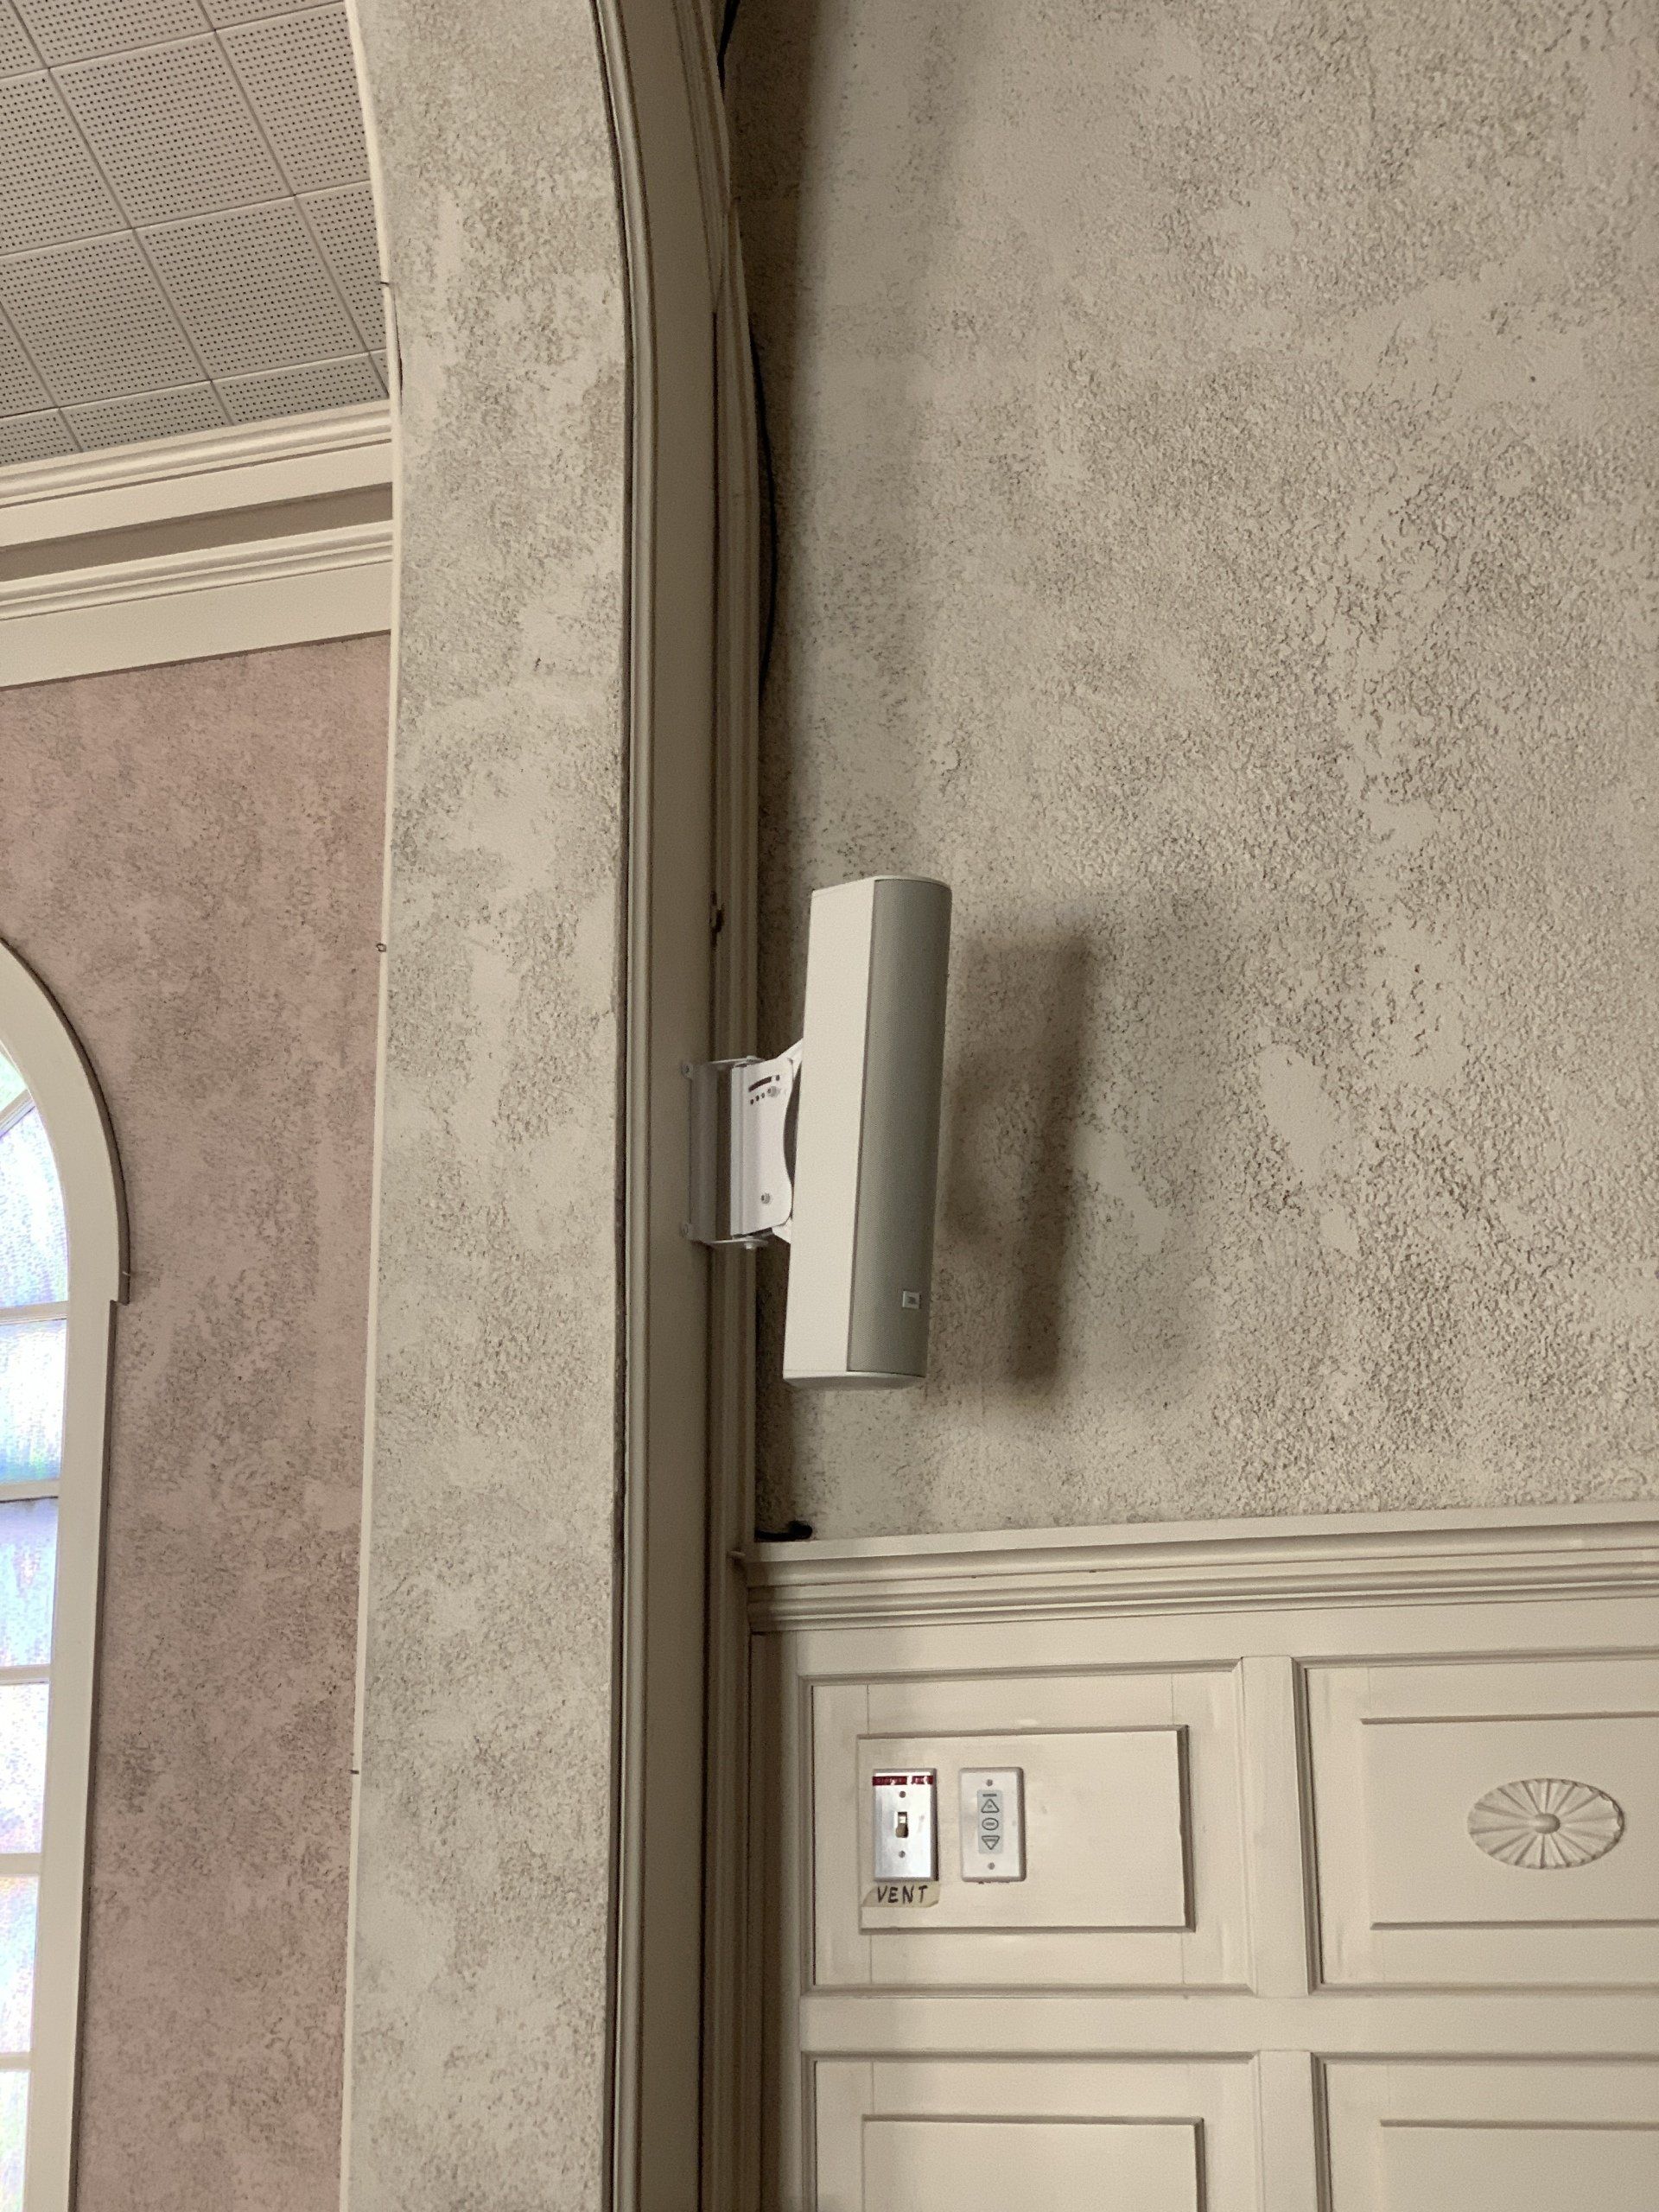 A white speaker is mounted on a wall next to a door.